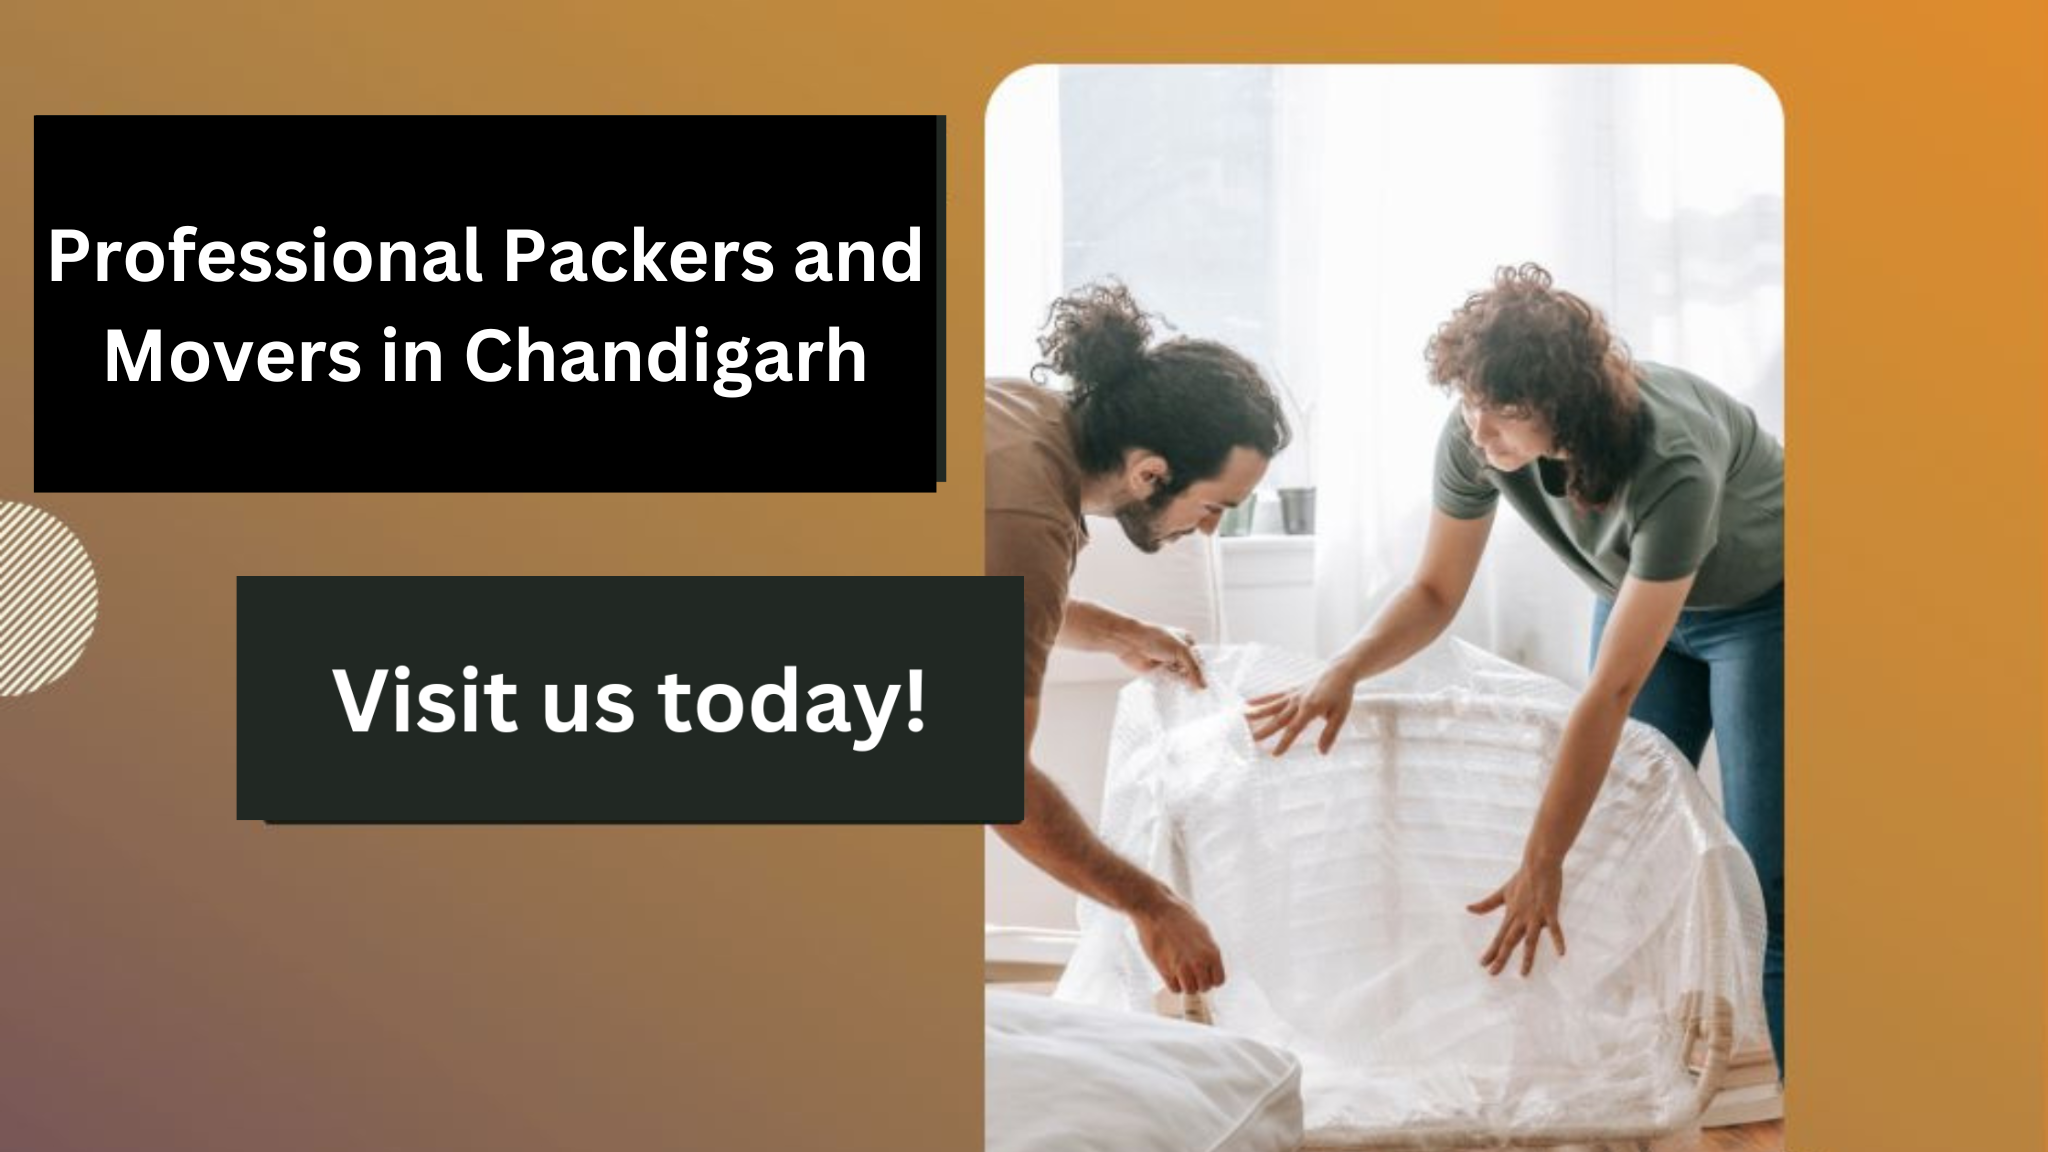 Professional Packers And Movers In Chandigarh